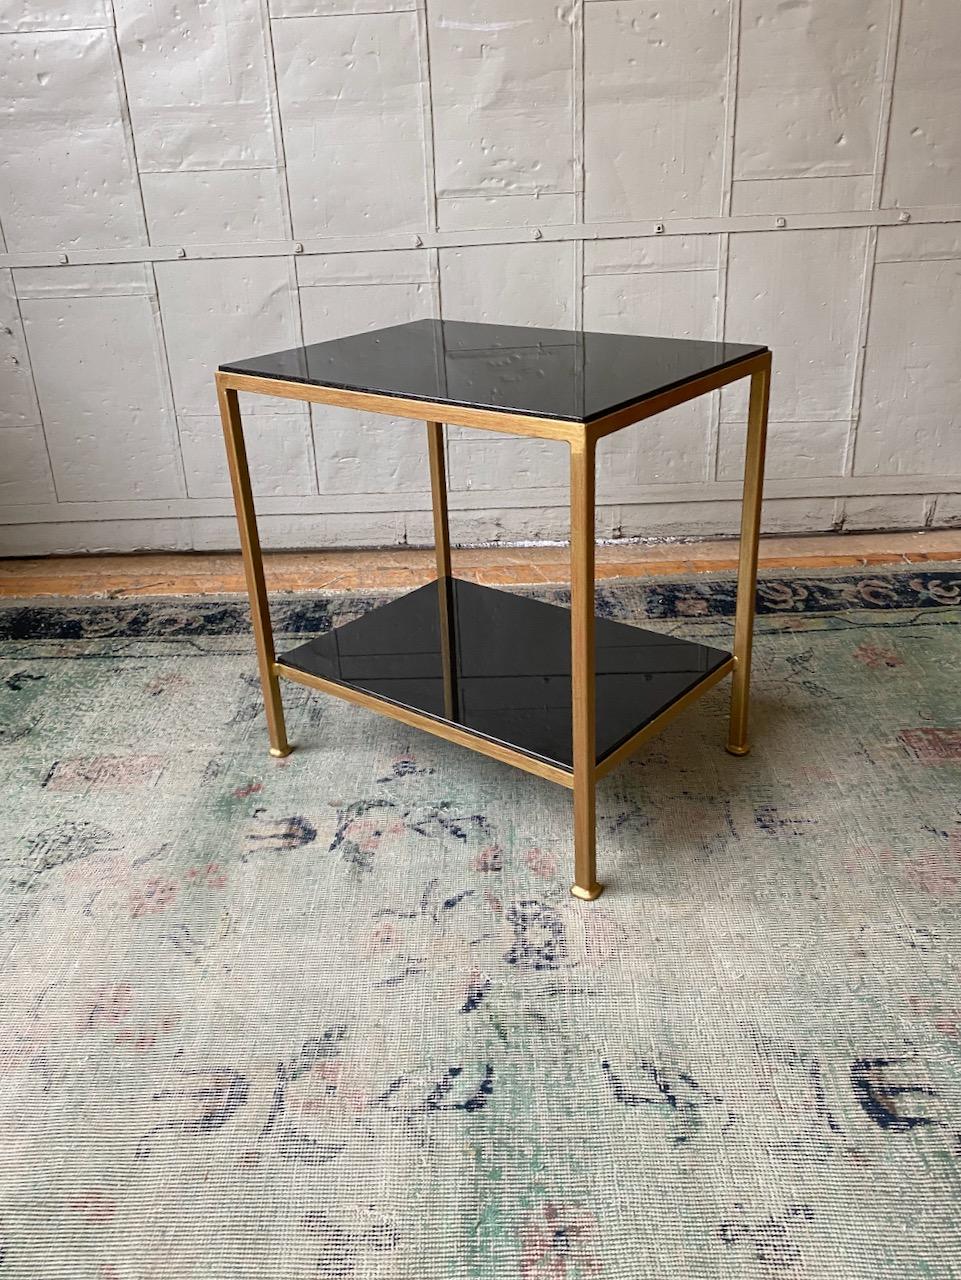 This well proportioned side table features an iron frame in a hand distressed gold finish with an undercoat of Venetian red. The shelves are polished absolute granite. This is a floor sample from our discontinued Reeditions line. The sample is in